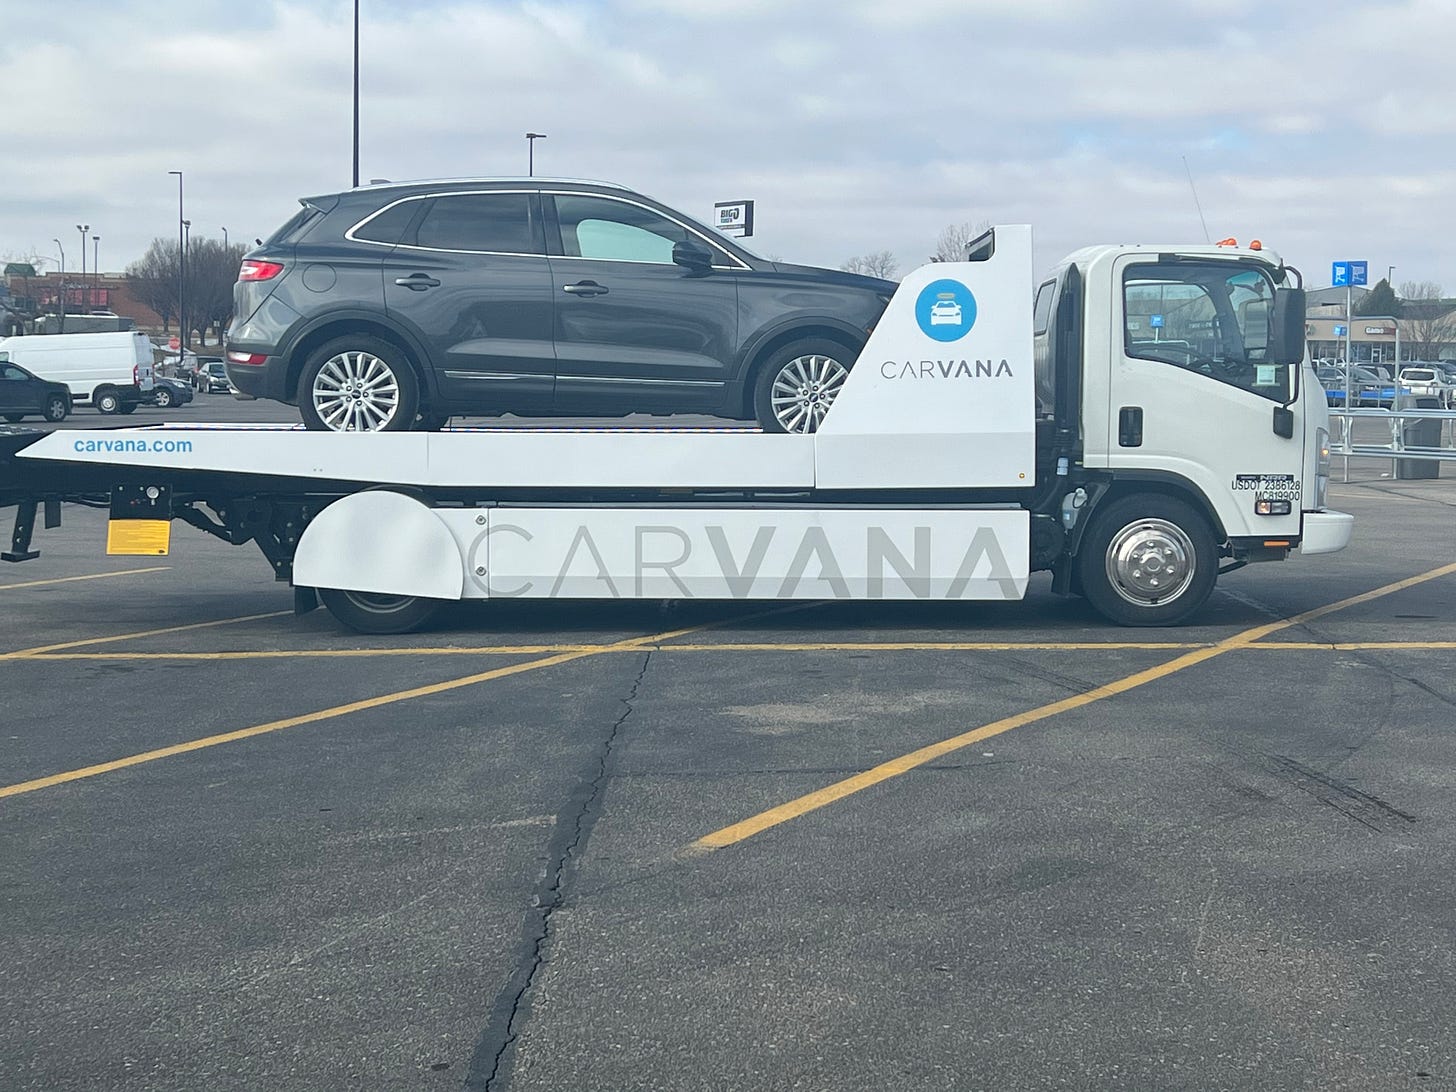 Carvana ($CVNA): The Only Way to Buy a Car (My Car Buying Experience), CarMax, Vroom, Dealerships, Swany407, Investment, CVNA Stock, Austin Swanson, "The New Way to Buy a Car", "The Only Way to Buy a Car" CVNA, Carvana Write-up, Carvana Investment Analysis, Carvana buying experience, delivery, logistics, app, ordering, pickup, schedule, text, return, cancel, financing, check, papers, signing, registration